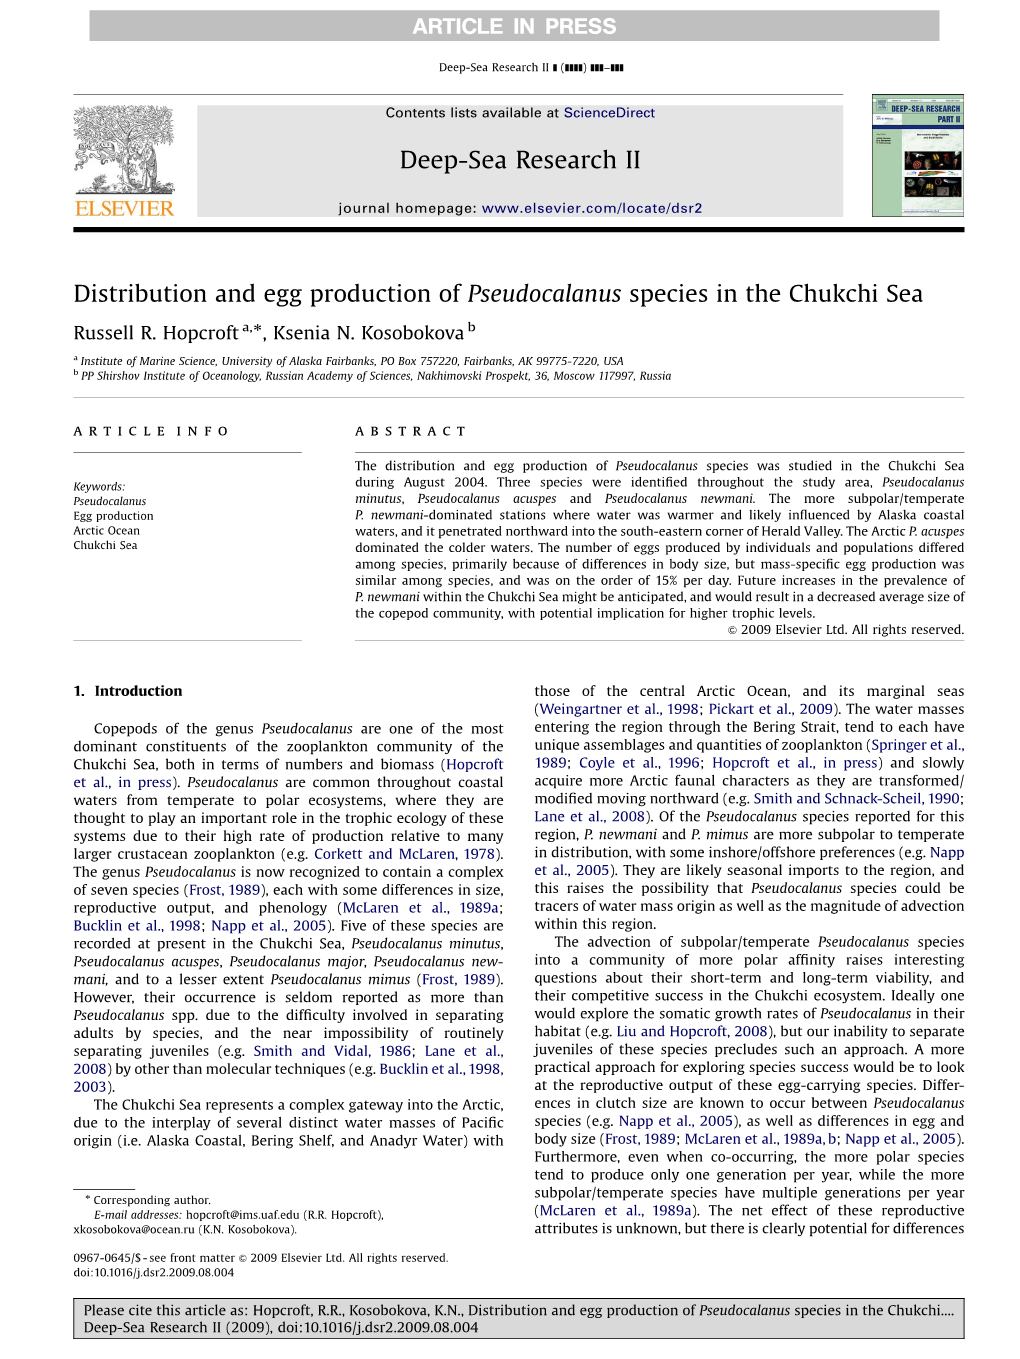 Distribution and Egg Production of Pseudocalanus Species in the Chukchi Sea